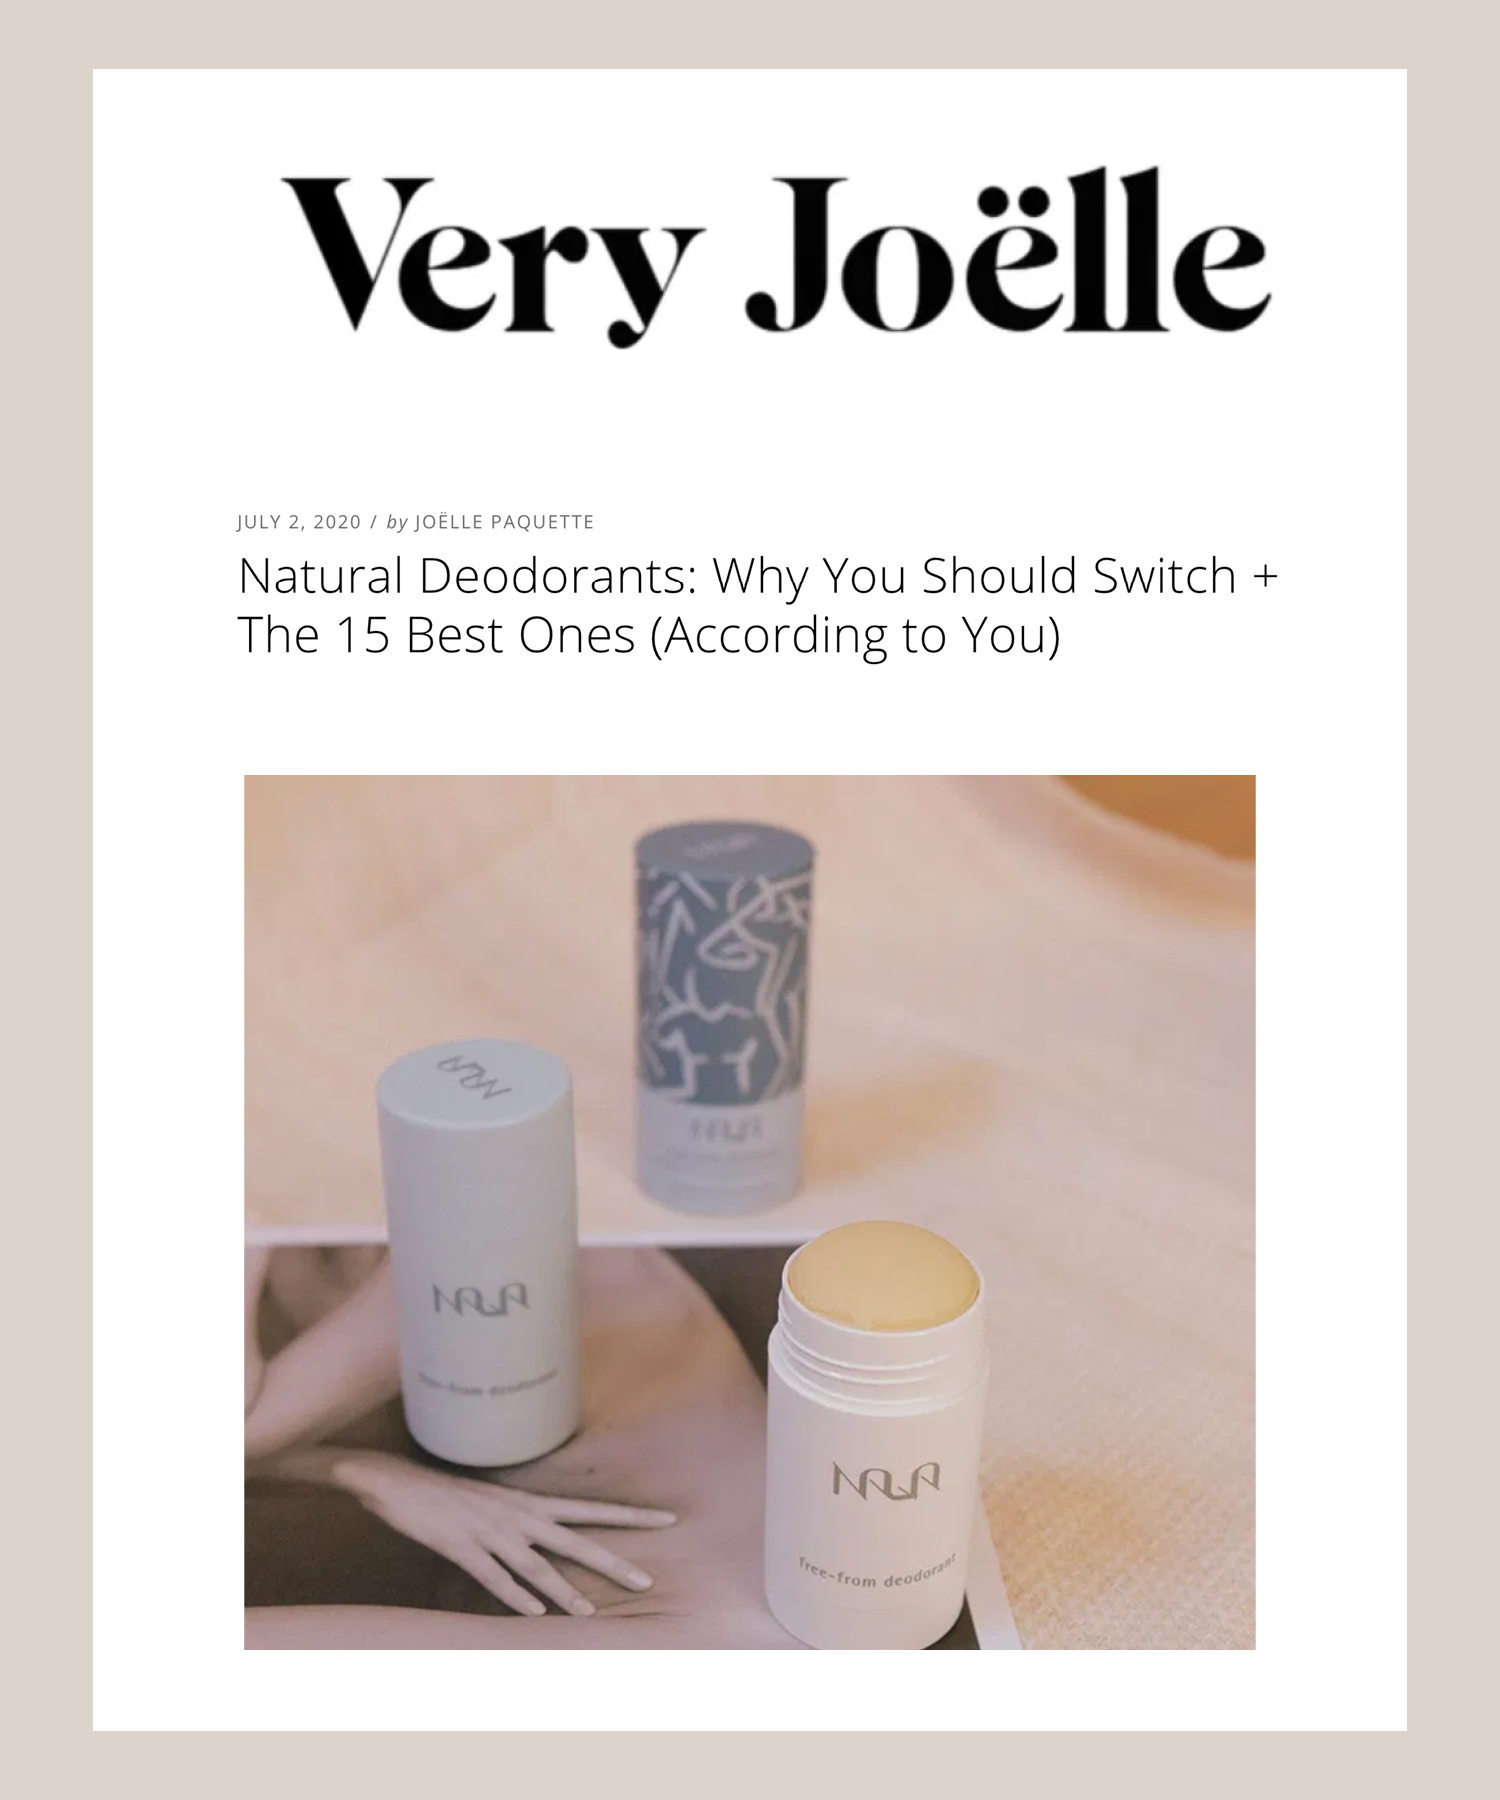 Very Joelle: Natural Deodorants, Why You Should Switch + The 15 Best Ones (According to You)